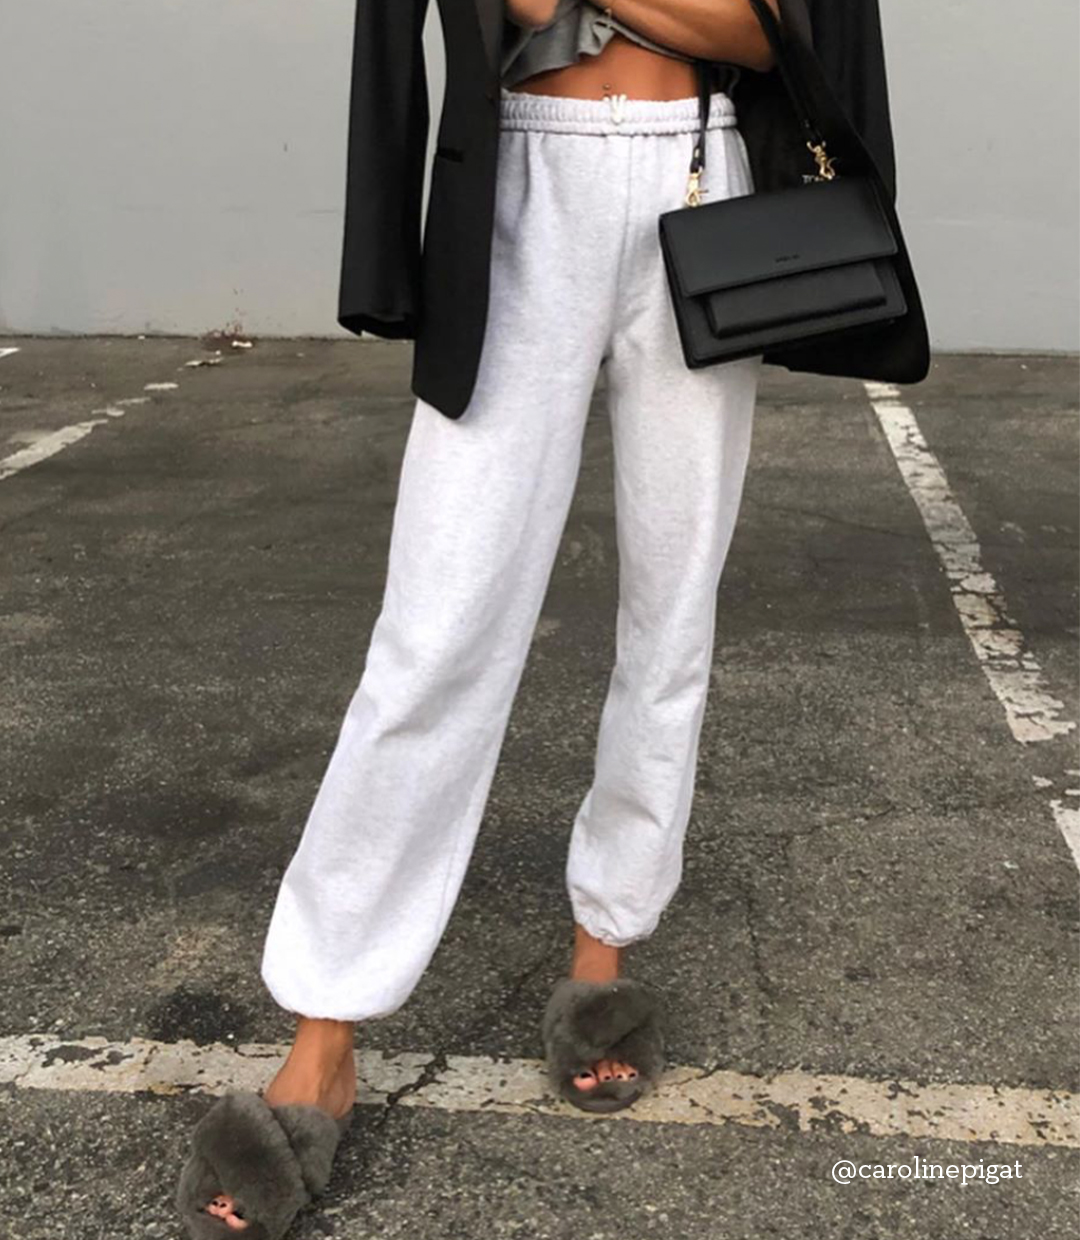 Influencer wearing EMU Mayberry sheepskin slippers outside in chic outfit